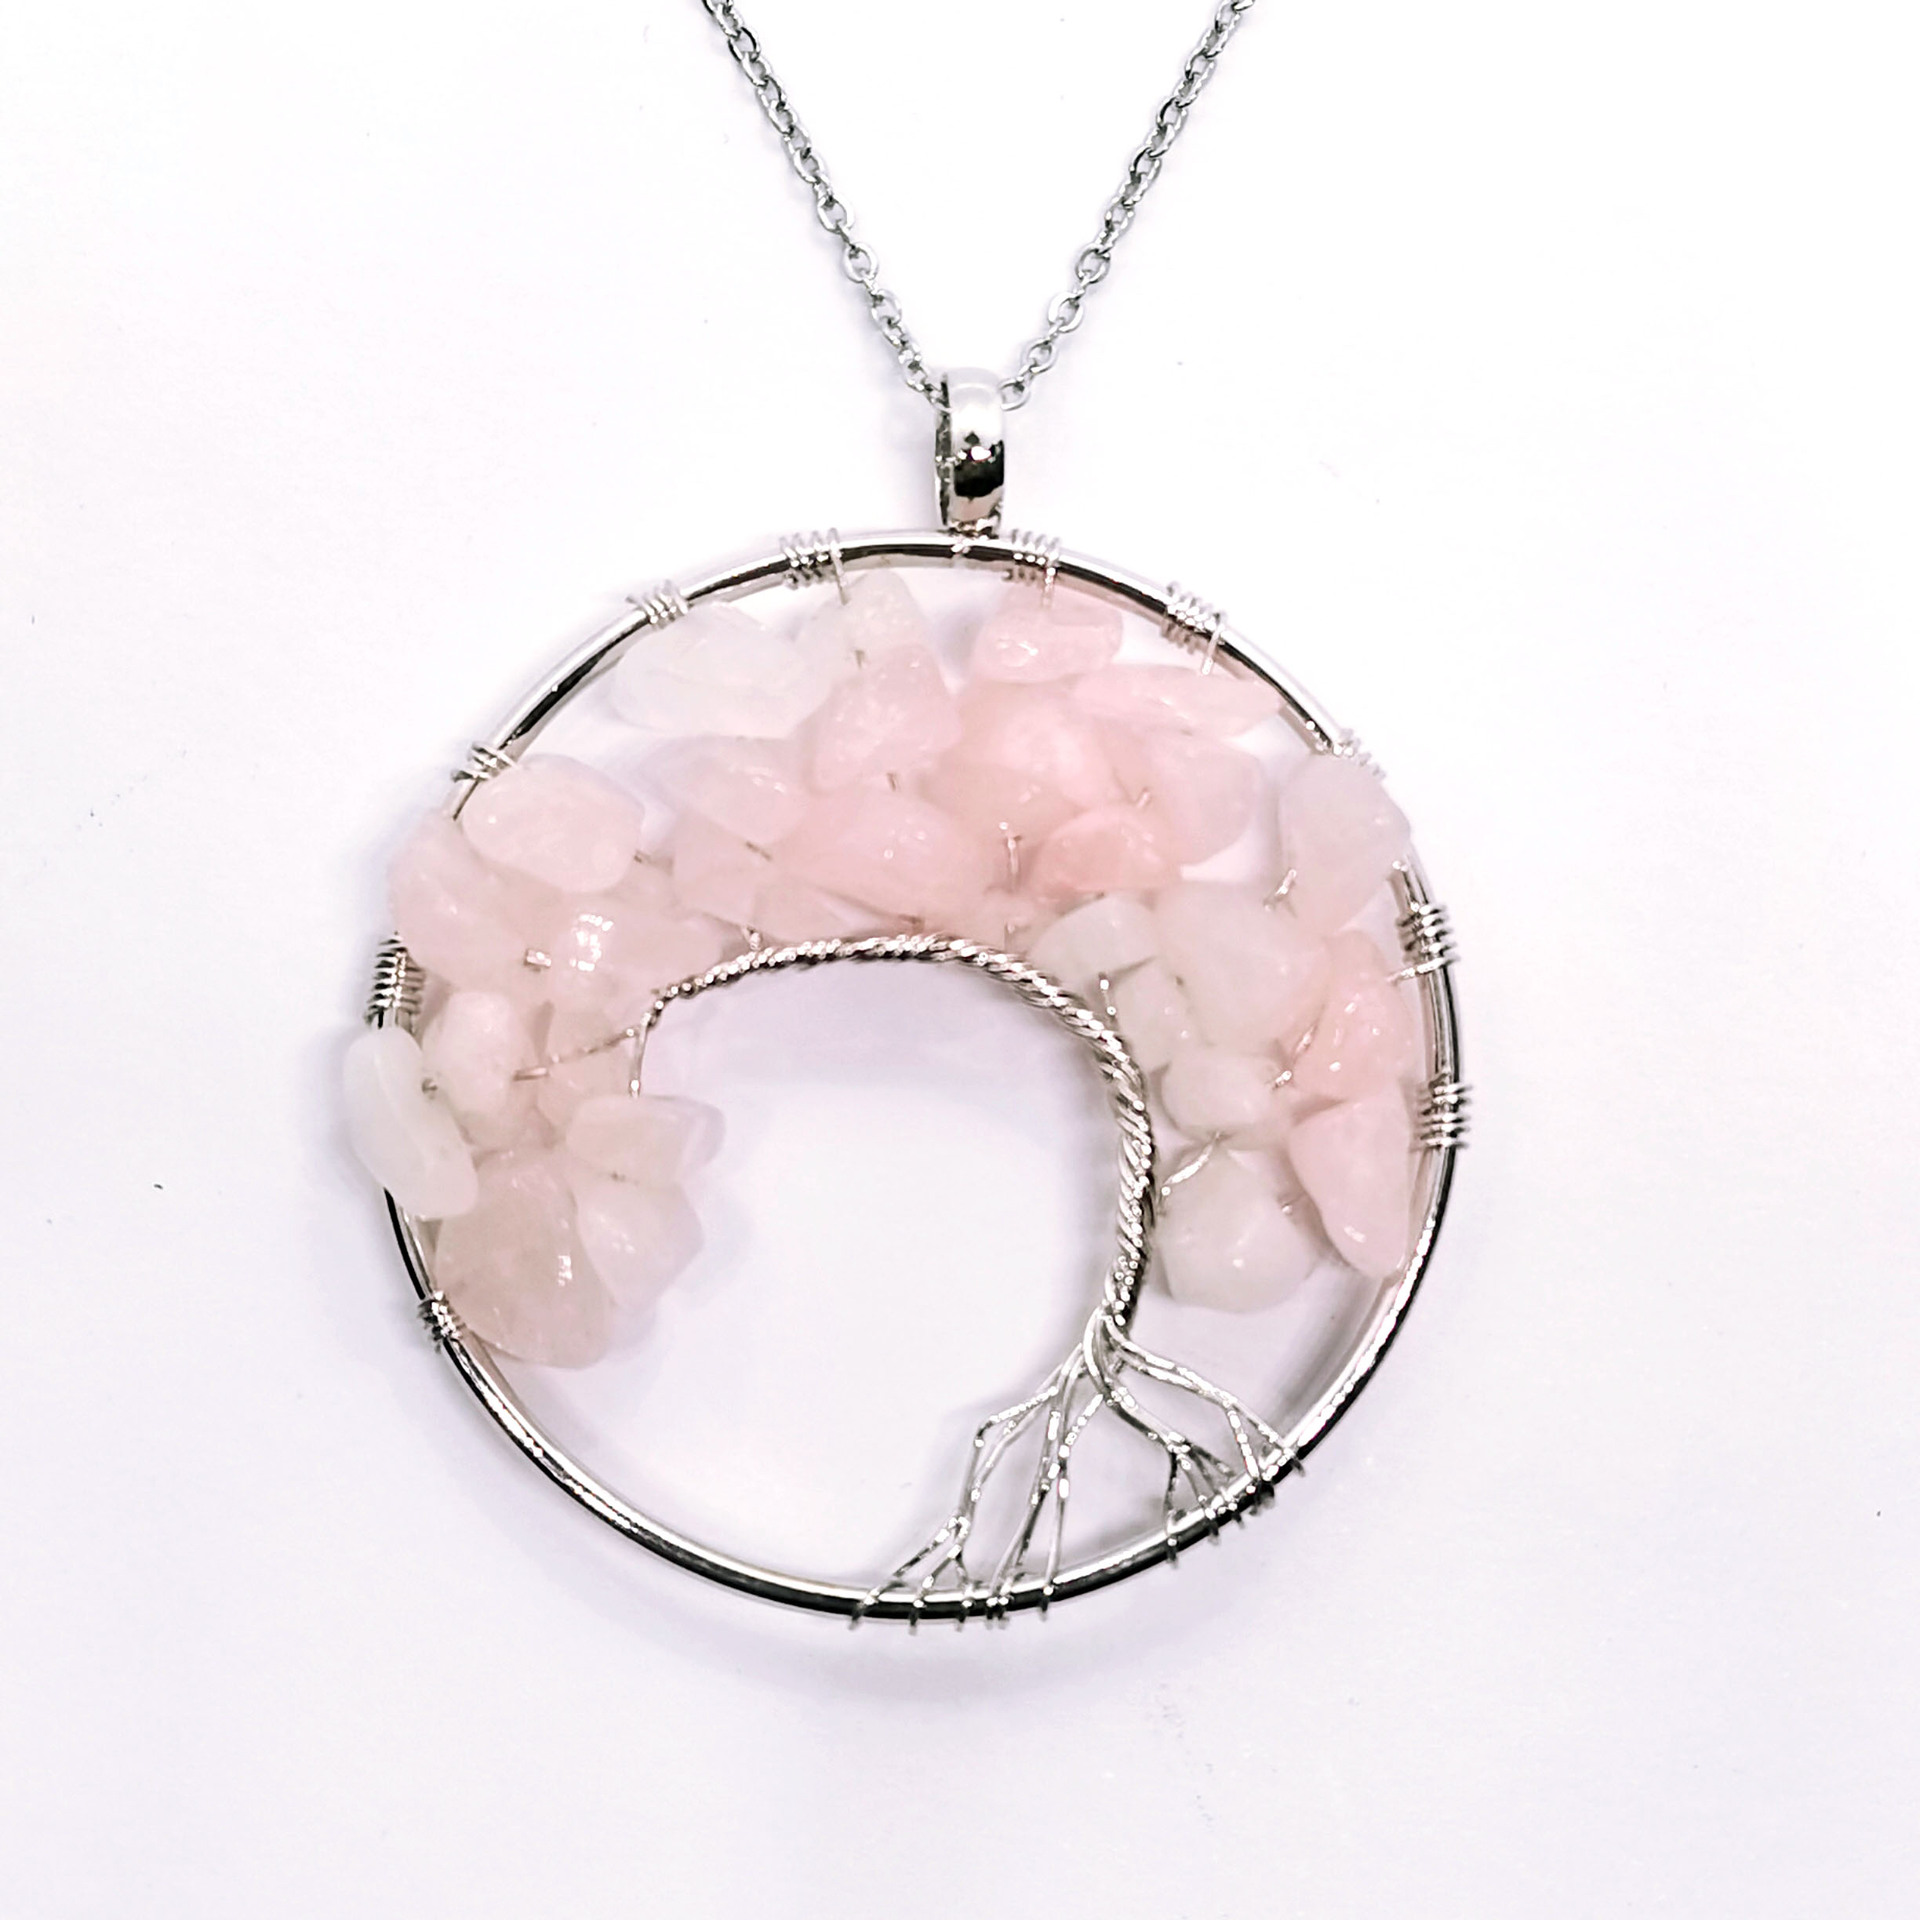 Chain - pink crystal